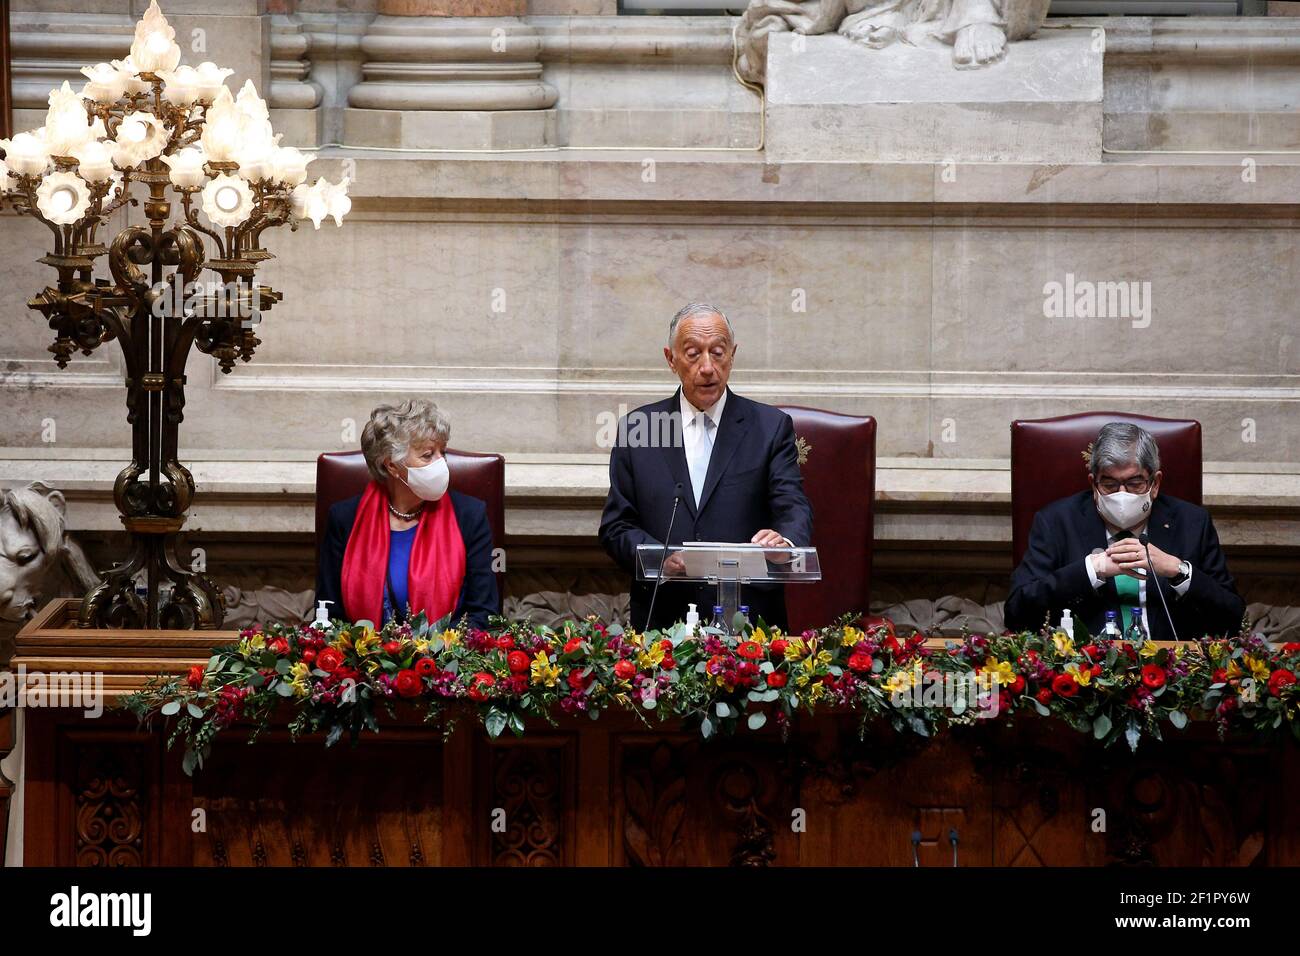 Lisbon, Portugal. 9th Mar, 2021. Re-elected Portuguese President Marcelo Rebelo de Sousa (C) delivers a speech during his second term swearing-in ceremony at the Parliament in Lisbon, Portugal, March 9, 2021. Portuguese President Marcelo Rebelo de Sousa was inaugurated on Tuesday for his second term as head of state, promising 'good use of European funds, with good management' of financial resources to help the country's post-pandemic recovery. Credit: Petro Fiuza/Xinhua/Alamy Live News Stock Photo